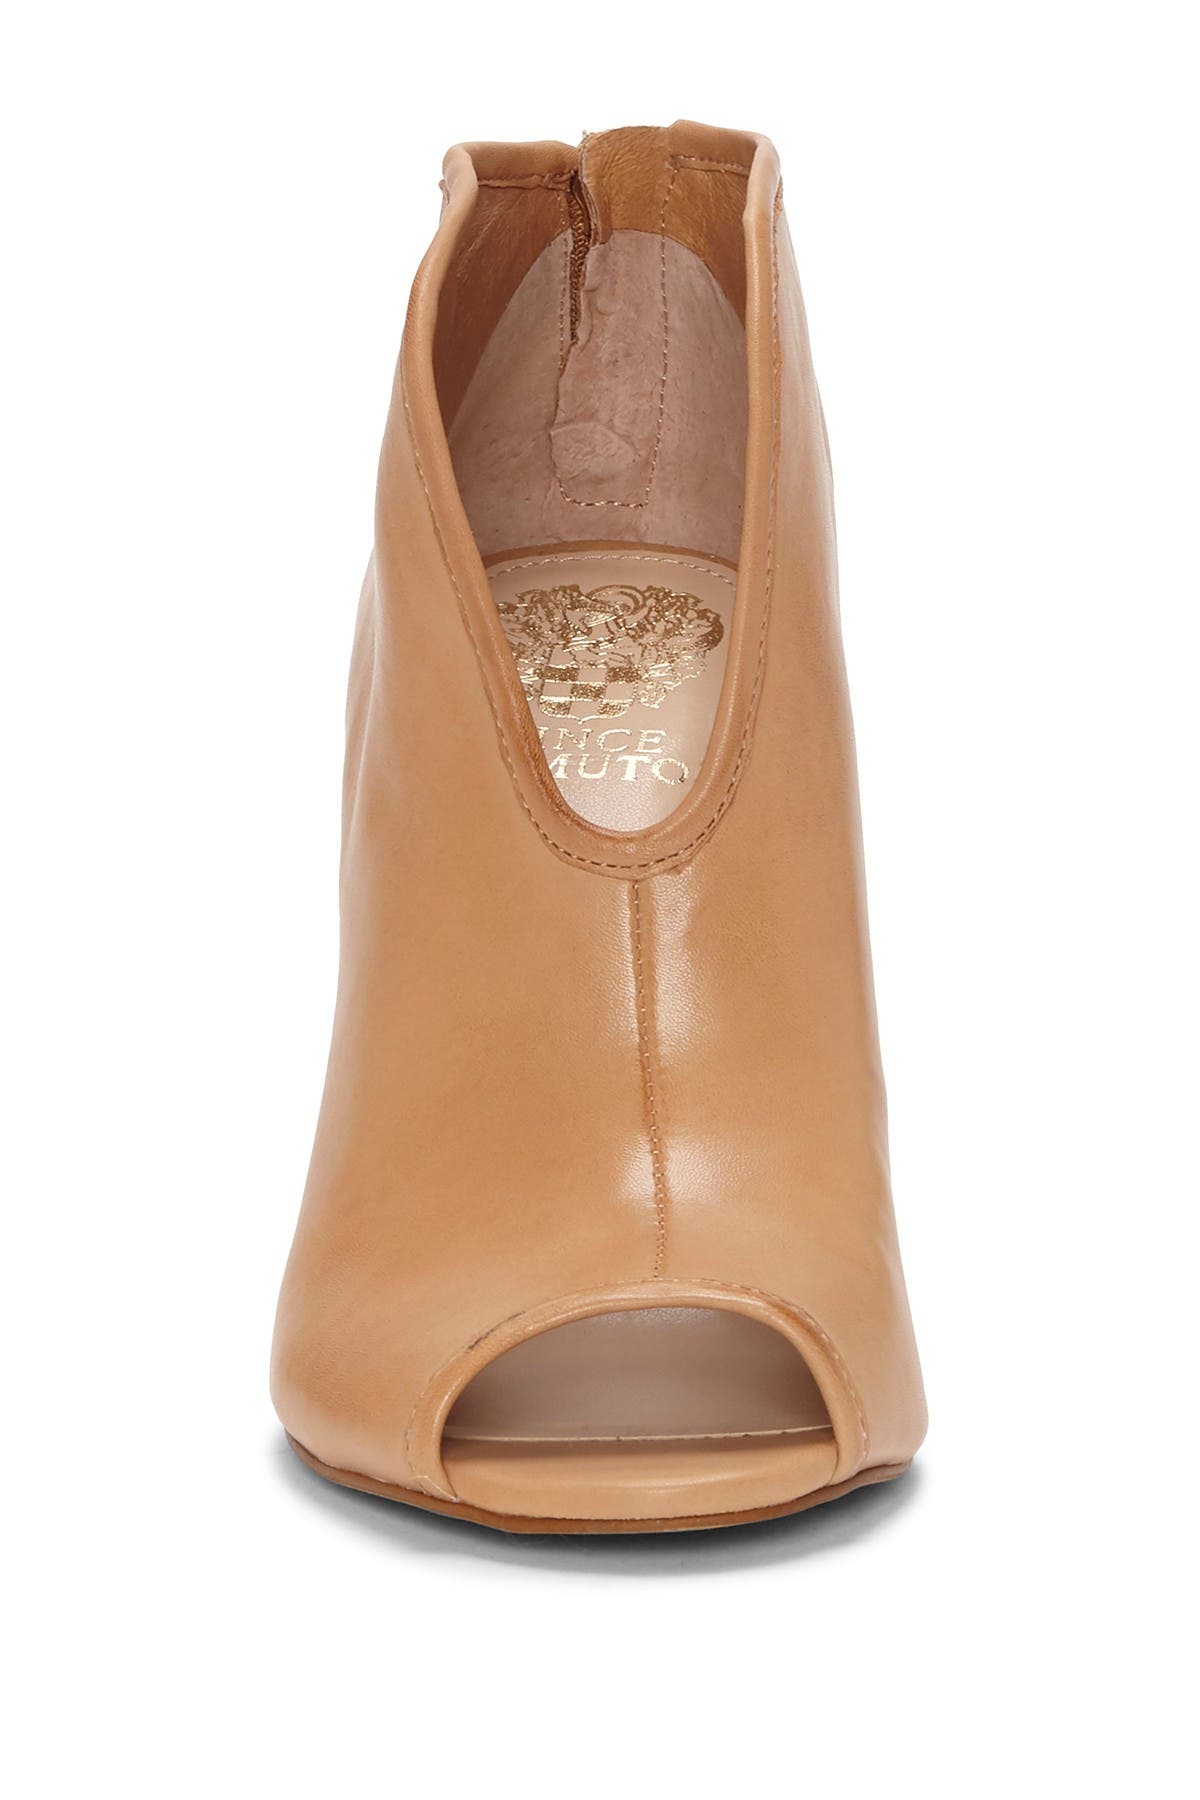 vince camuto amber peep toe bootie